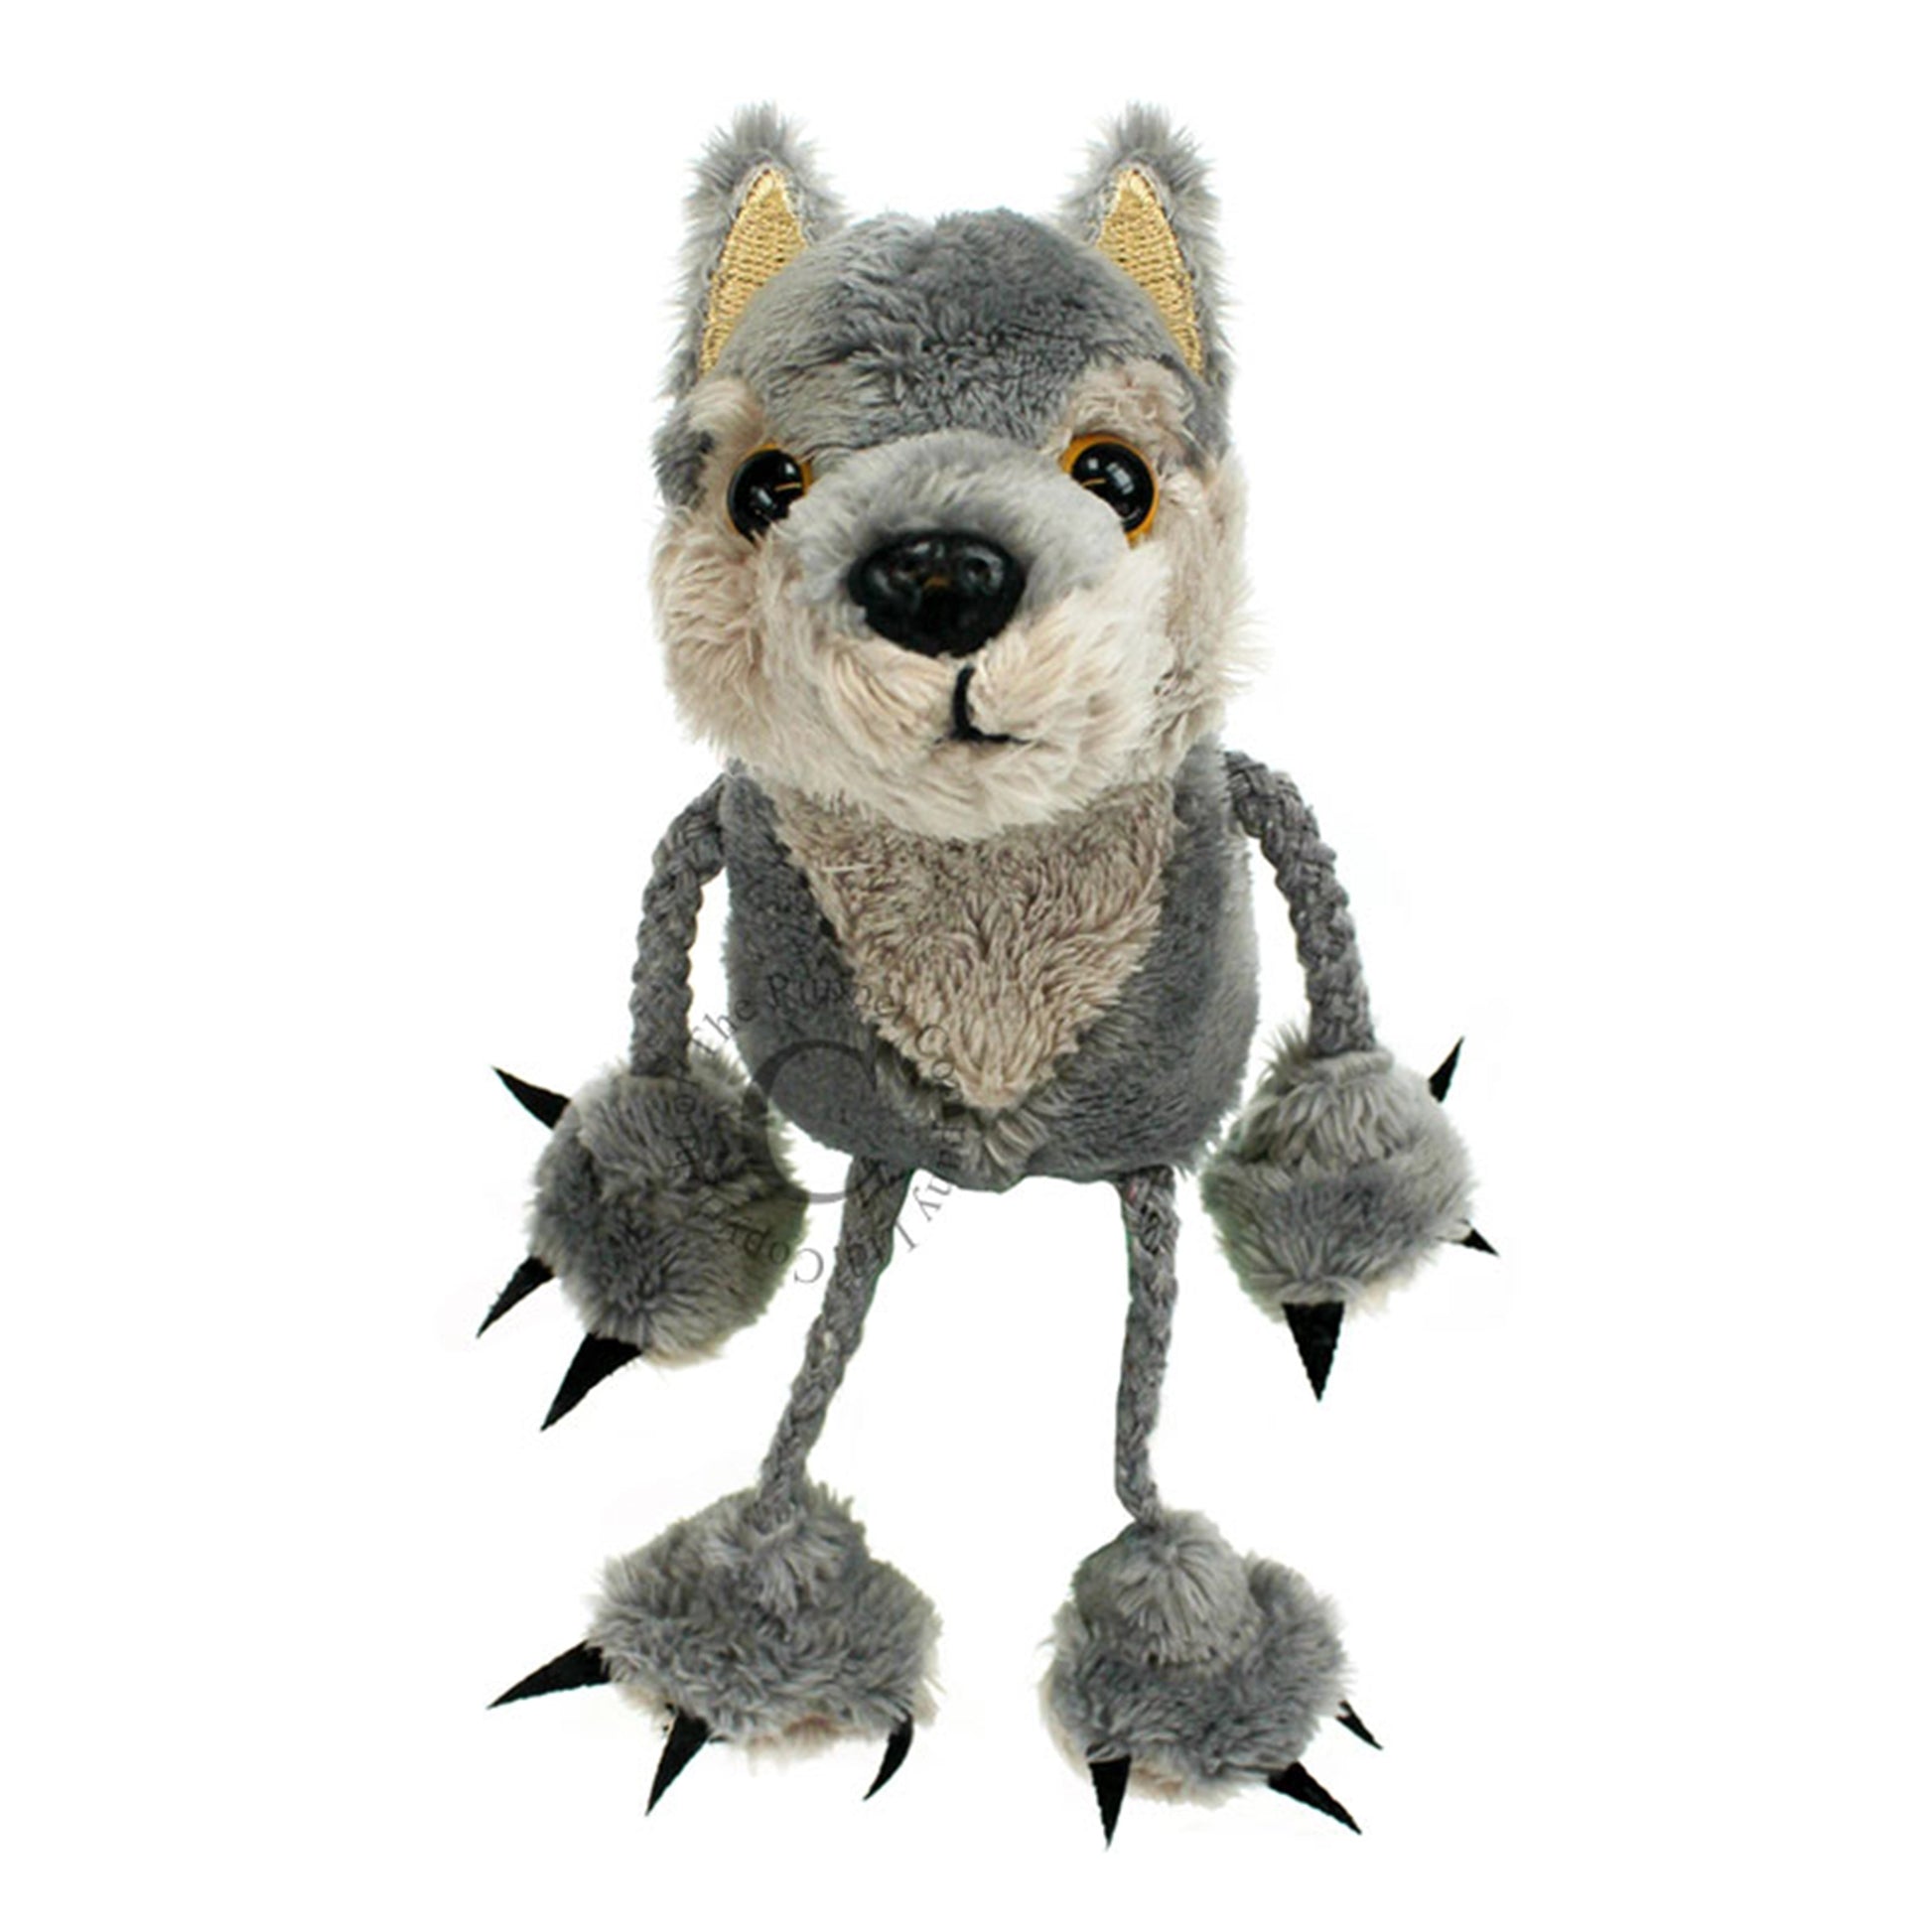 Wolf Finger Puppet - The Puppet Company - The Forgotten Toy Shop